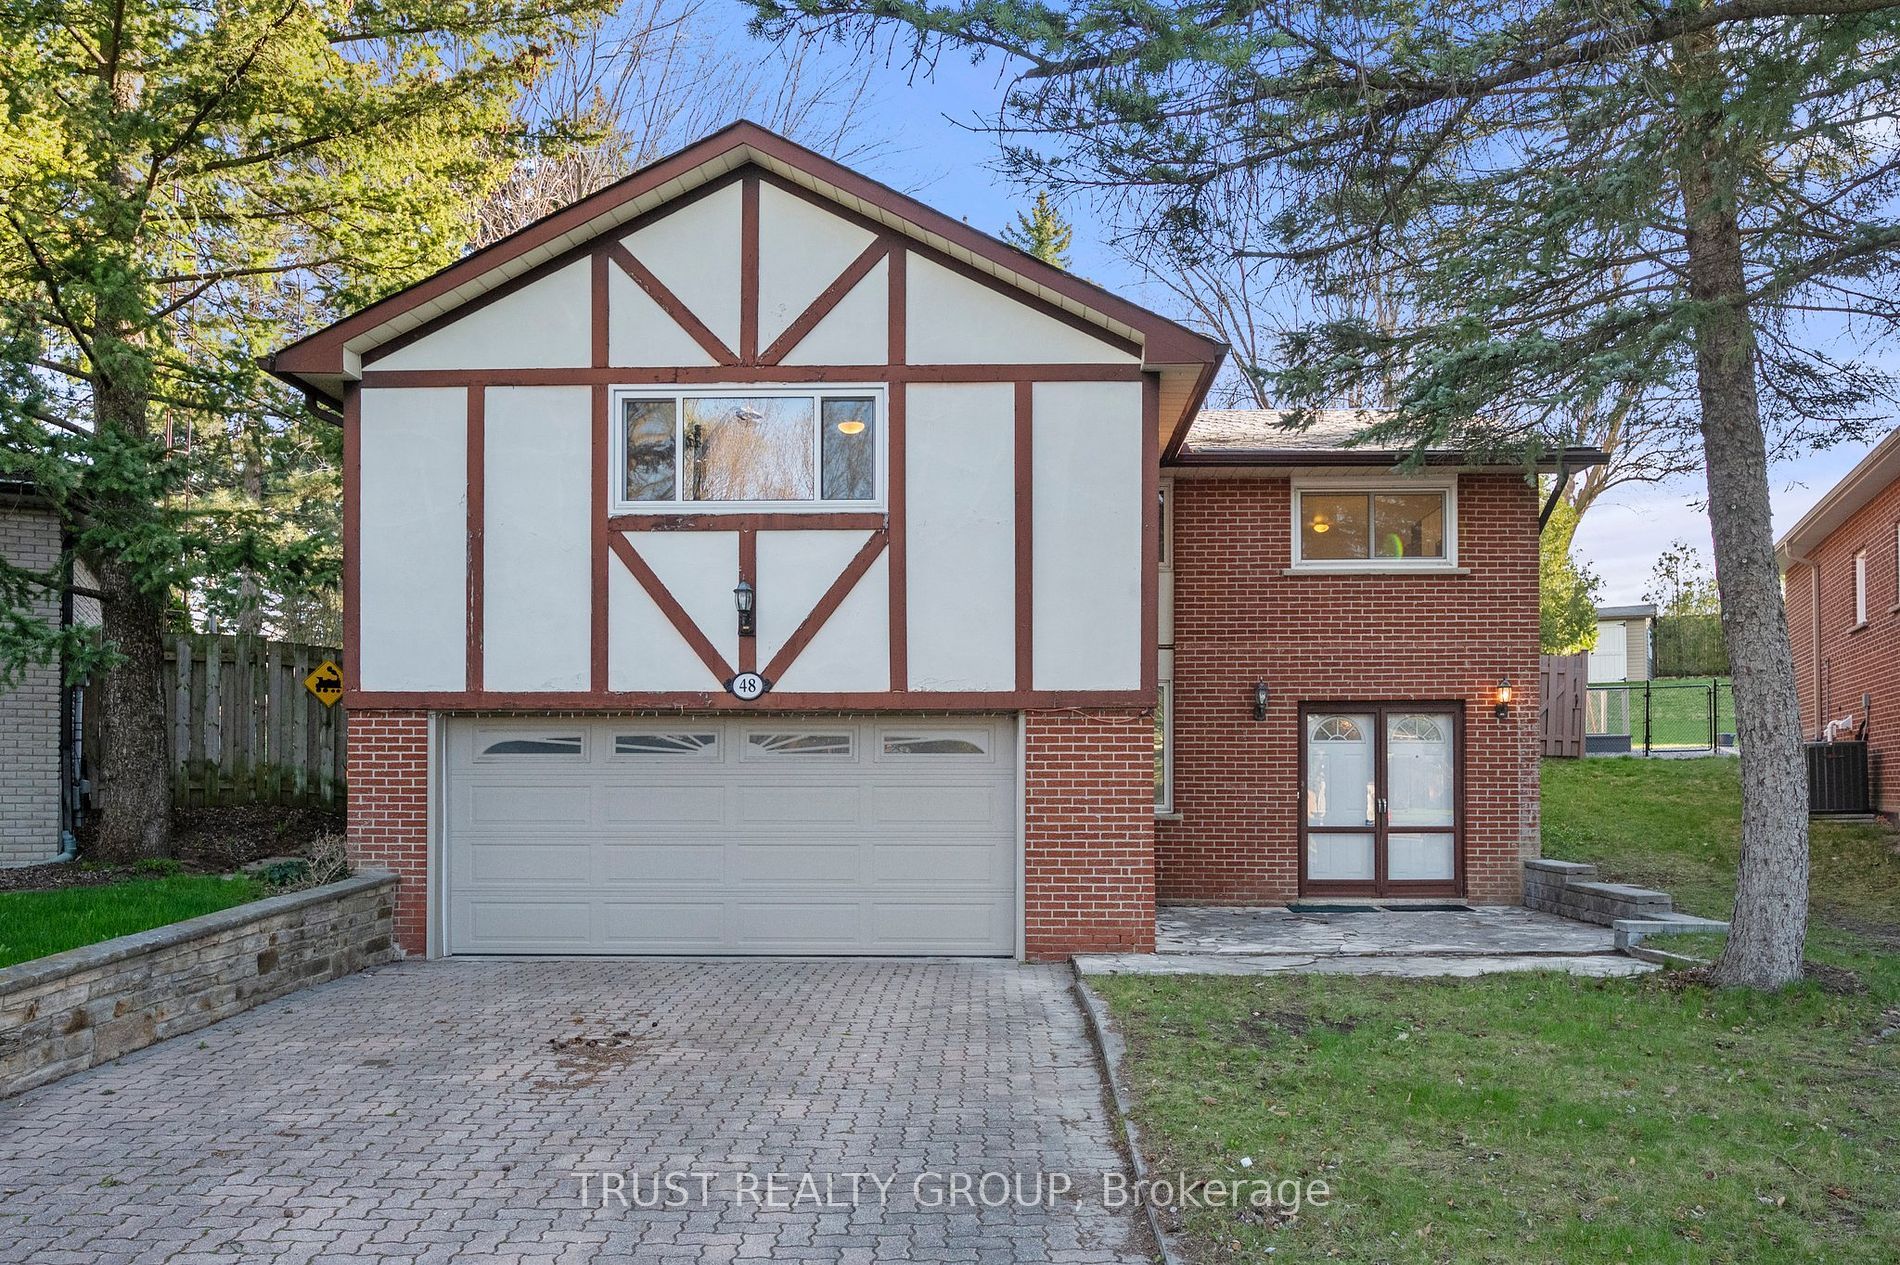 I have sold a property at 48 Shieldmark CRES in Markham
